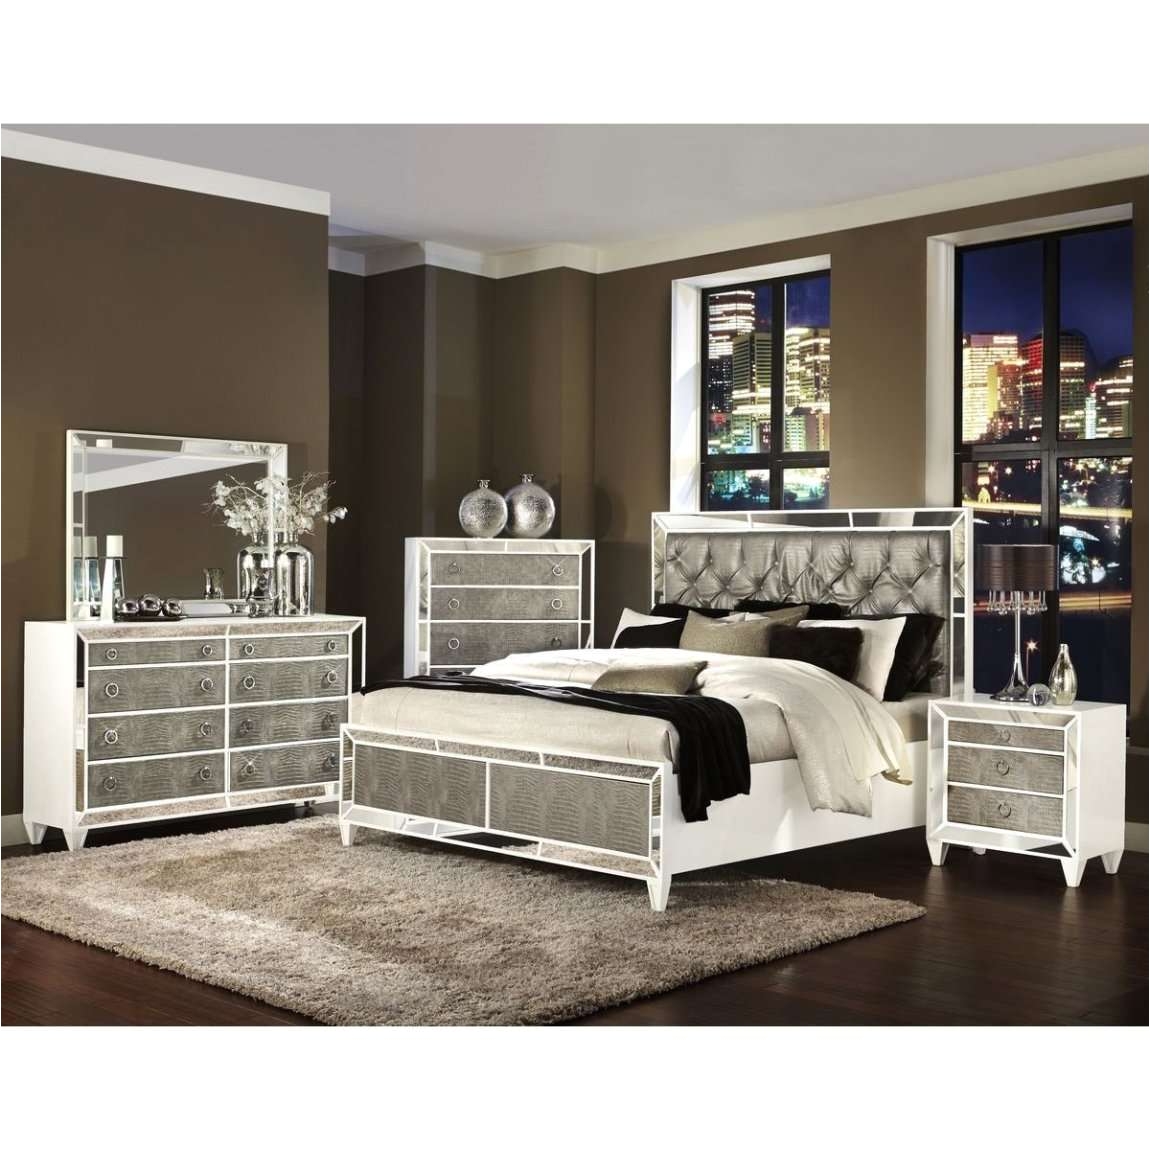 raymour and flanigan king bedroom sets fresh king size bed sets walmart forter bath and beyond